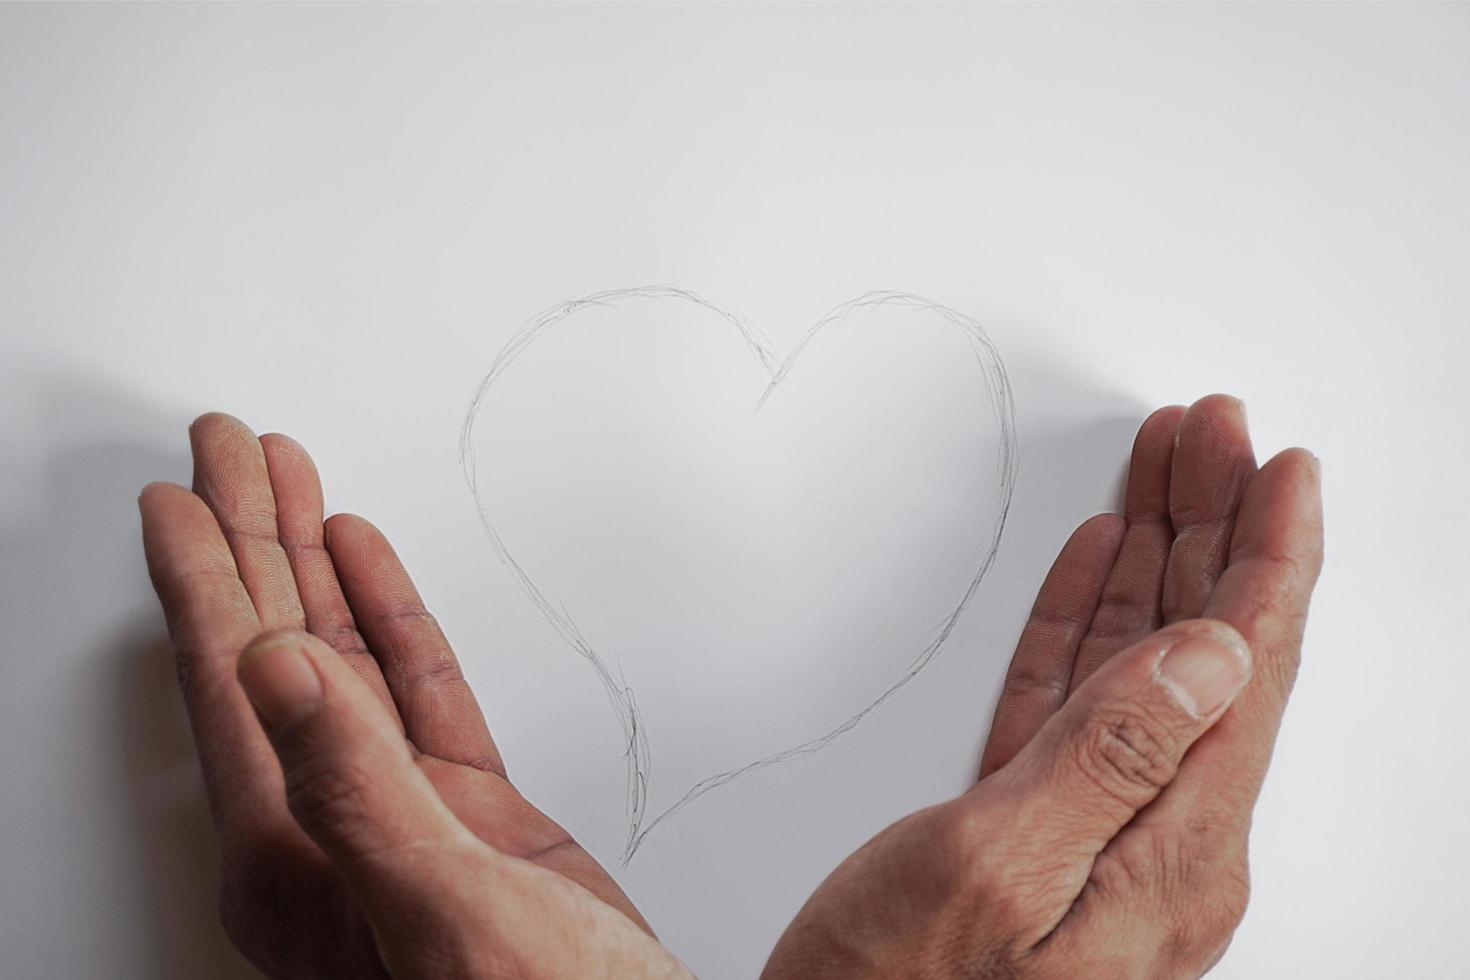 A young man's hand caring for a heart shape handwritten from a pencil photo